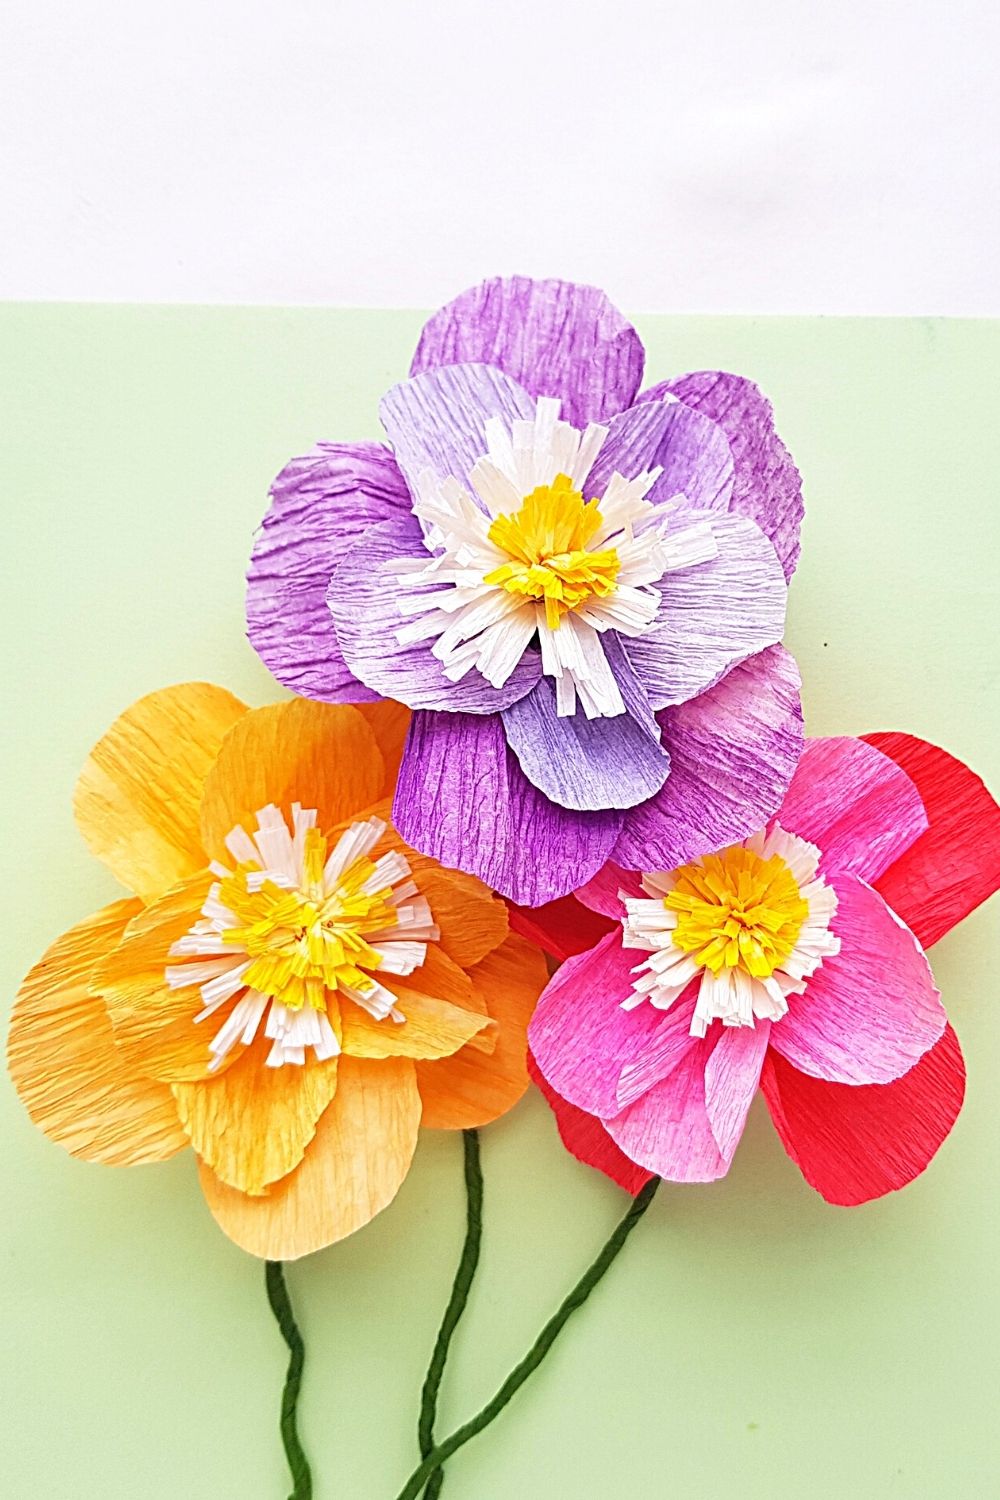 Add a floral touch to your home with beautiful handmade Crepe Paper Flowers in different colors. This fun craft requires creativity and a few supplies to help you create some of the most stunning artificial floral pieces to use as decorations in the home.